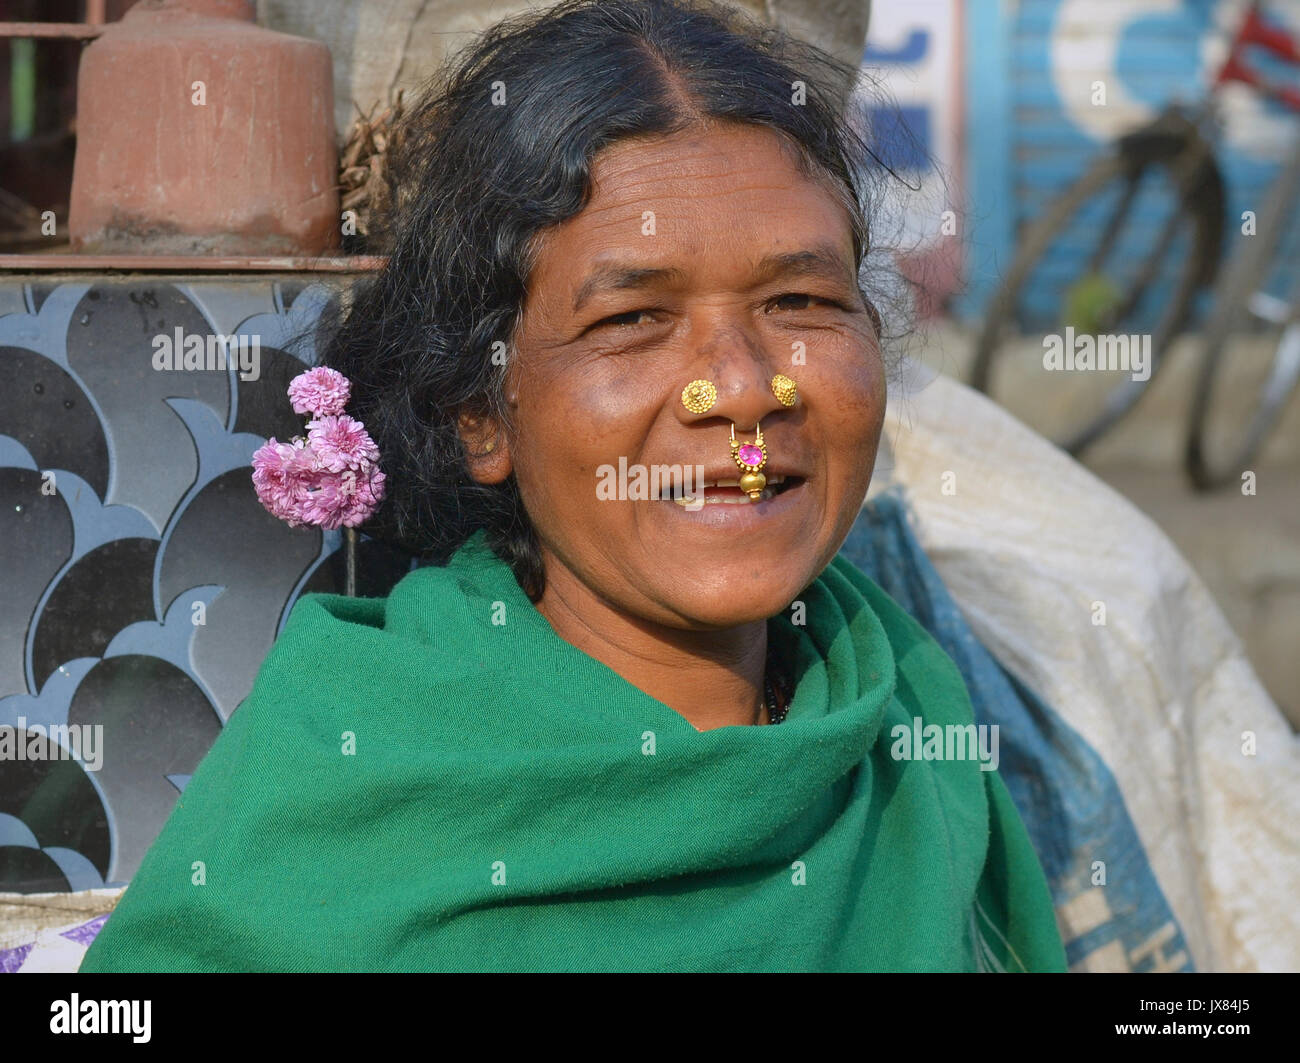 Indian Adivasi woman with two nose studs and nose-septum jewellery smiles for the camera. Stock Photo